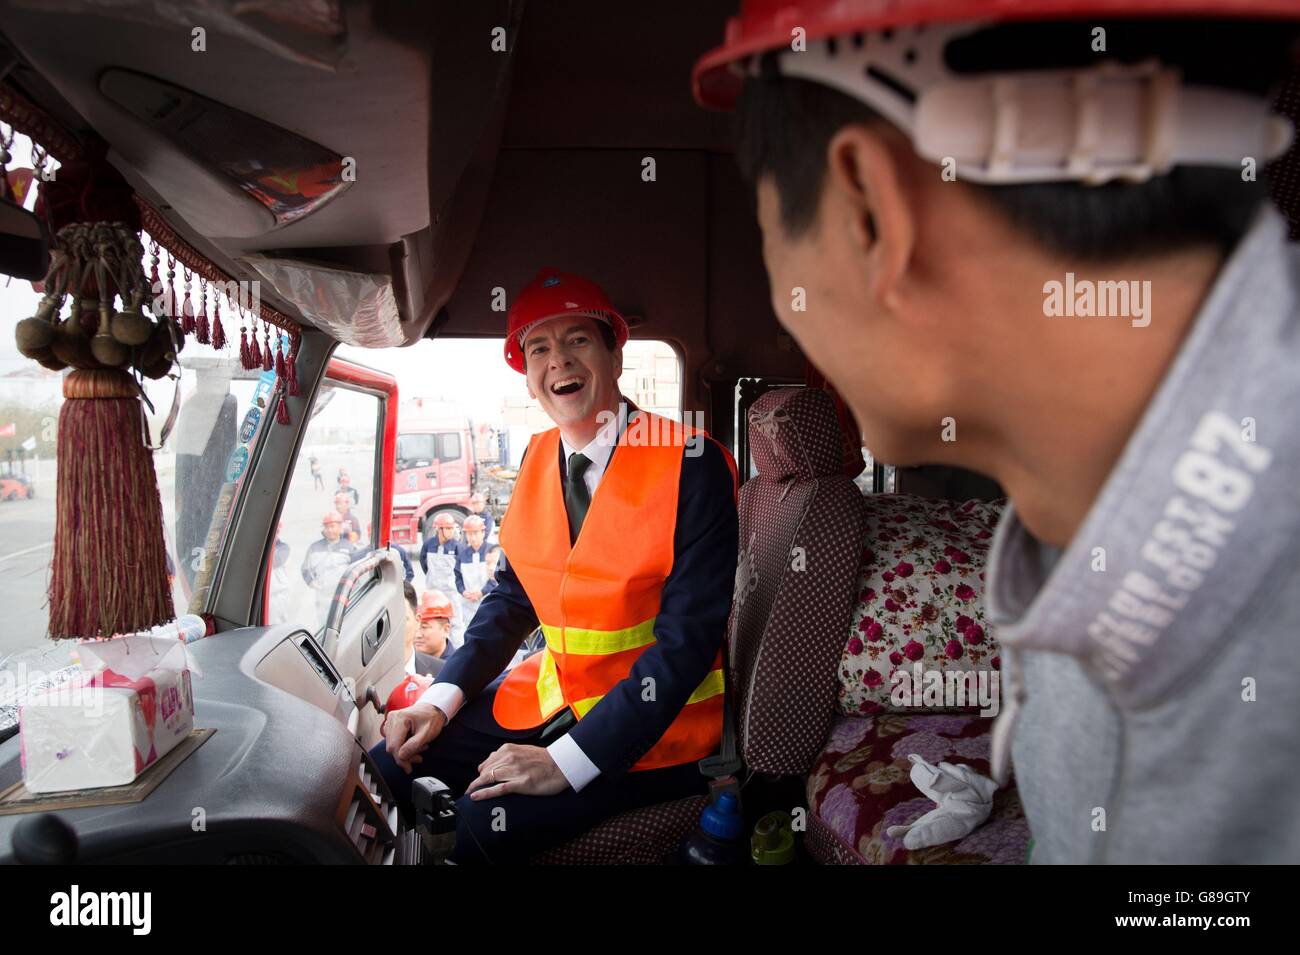 Chancellor of the Exchequer George Osborne visits an industrial area in the city of Urumqi in north west China, after he became the first serving government minister to travel to Xinjiang province. Stock Photo